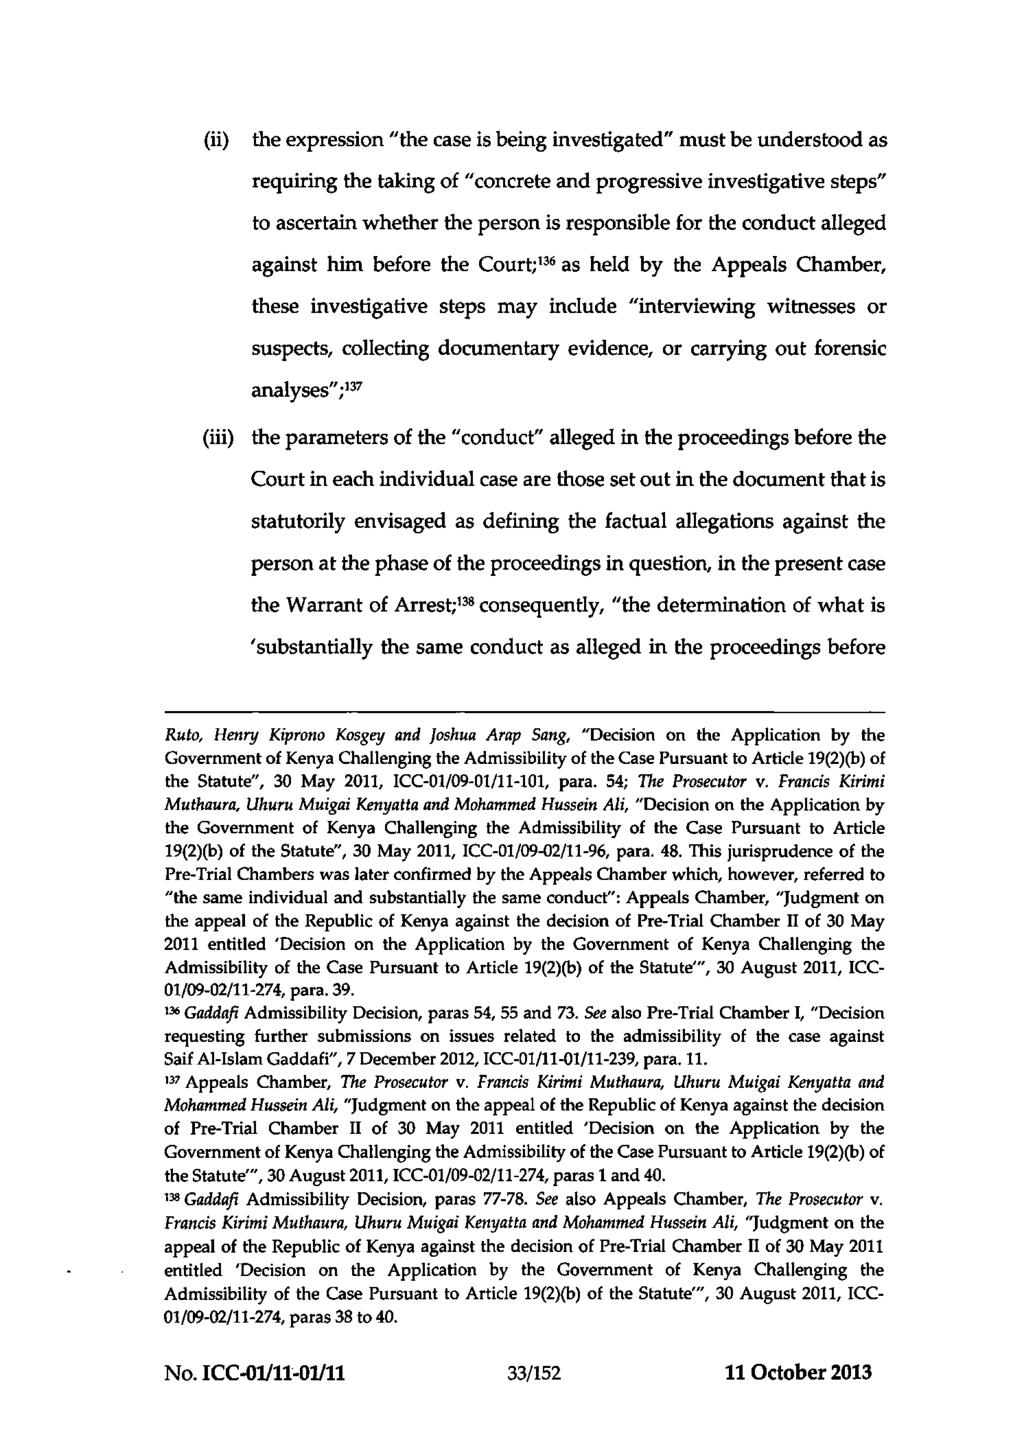 ICC-01/11-01/11-466-Red 11-10-2013 33/152 NM PT (ii) the expression "the case is being investigated" must be understood as requiring the taking of "concrete and progressive investigative steps" to